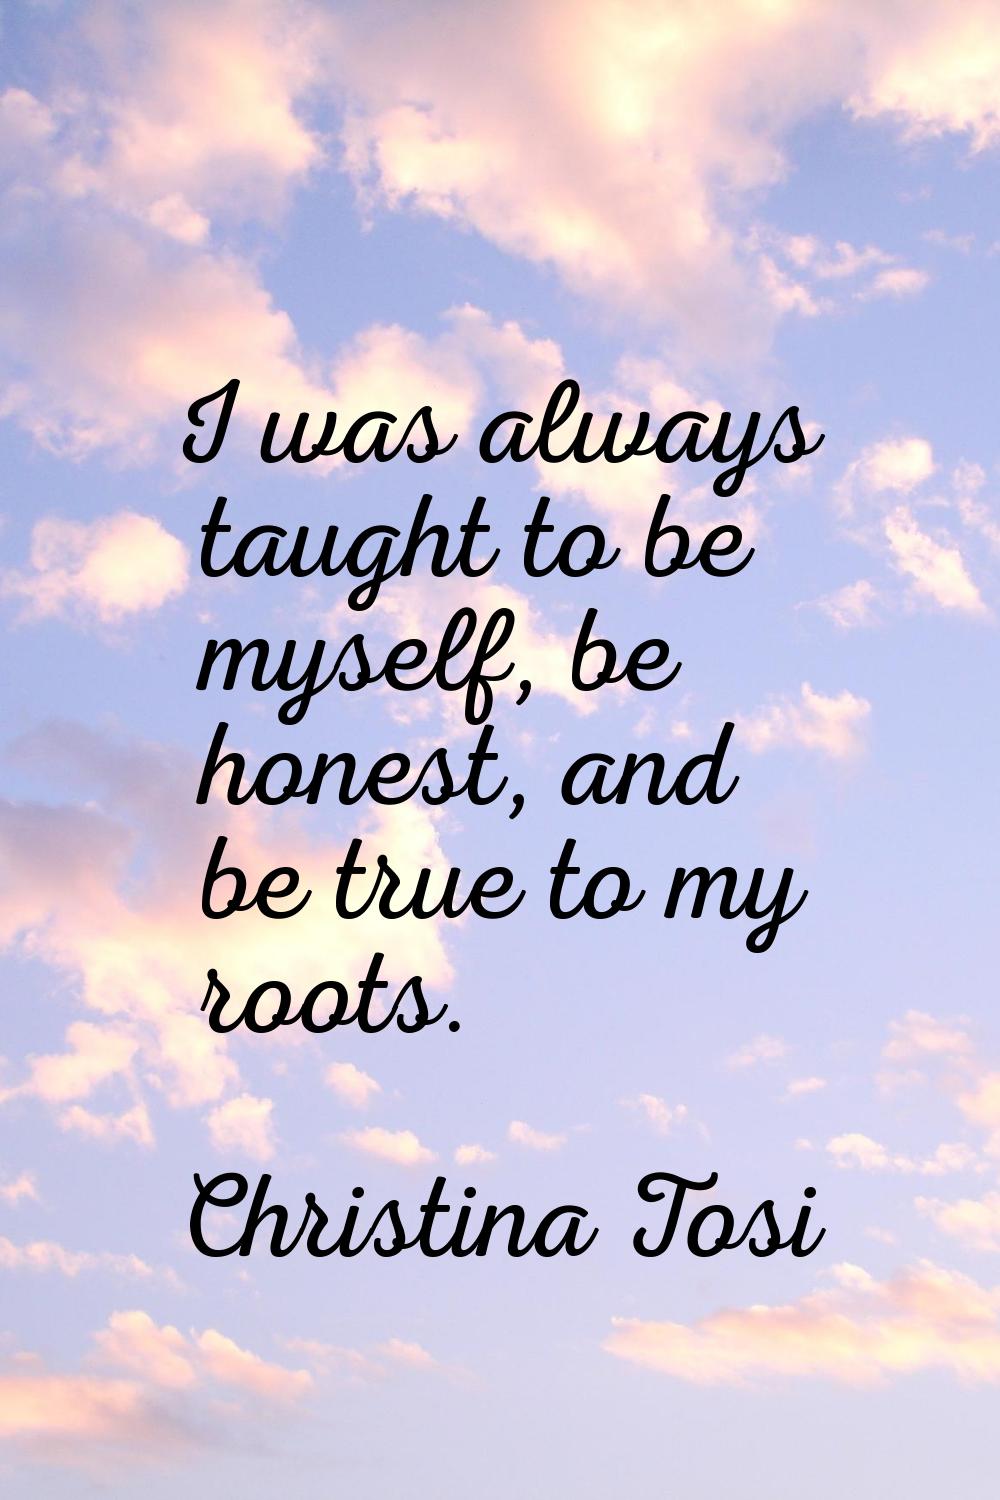 I was always taught to be myself, be honest, and be true to my roots.